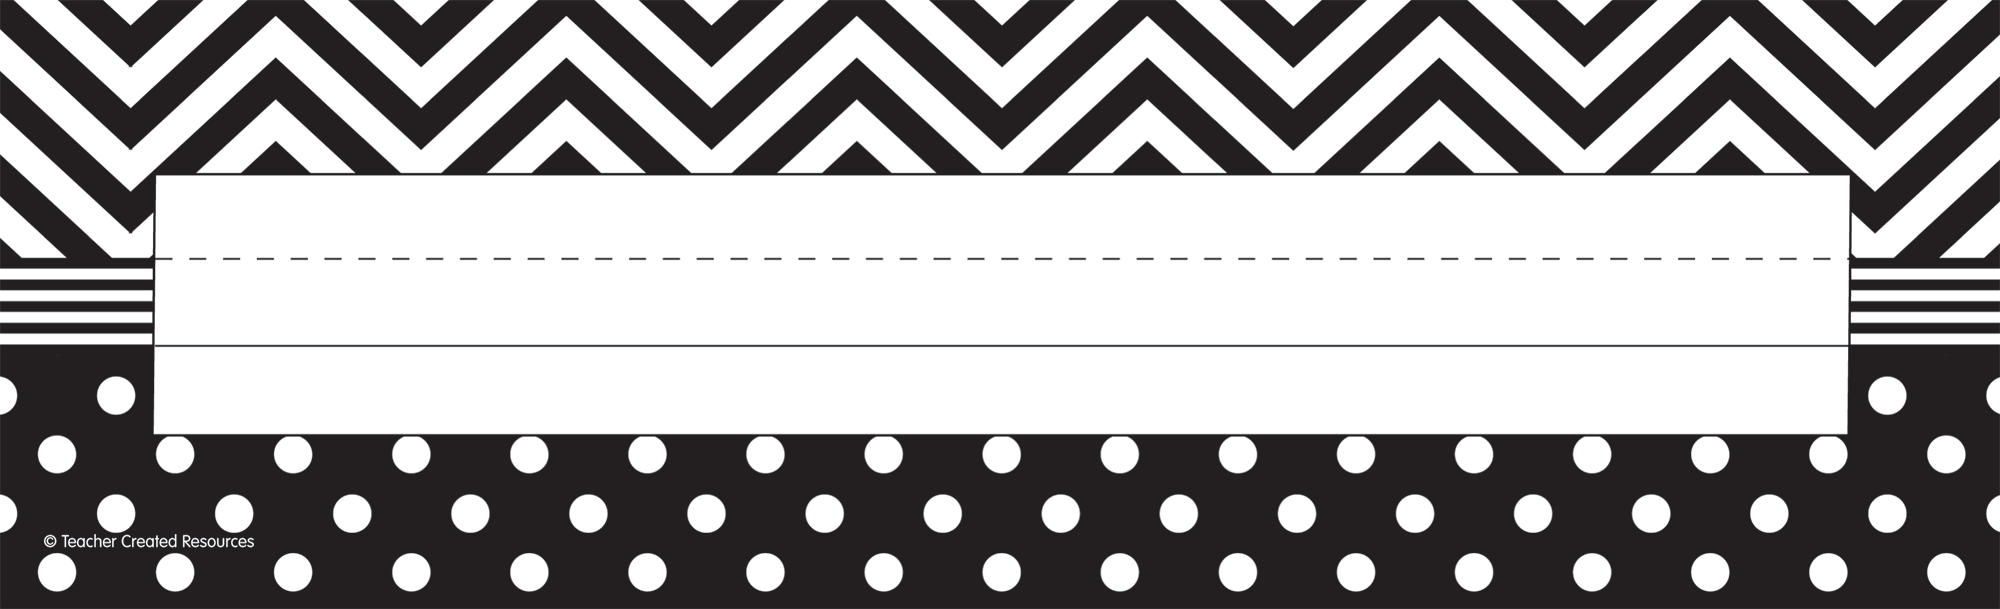 Black & White Chevrons and Dots Name Tags/Labels Teacher Created Resources TCR55 